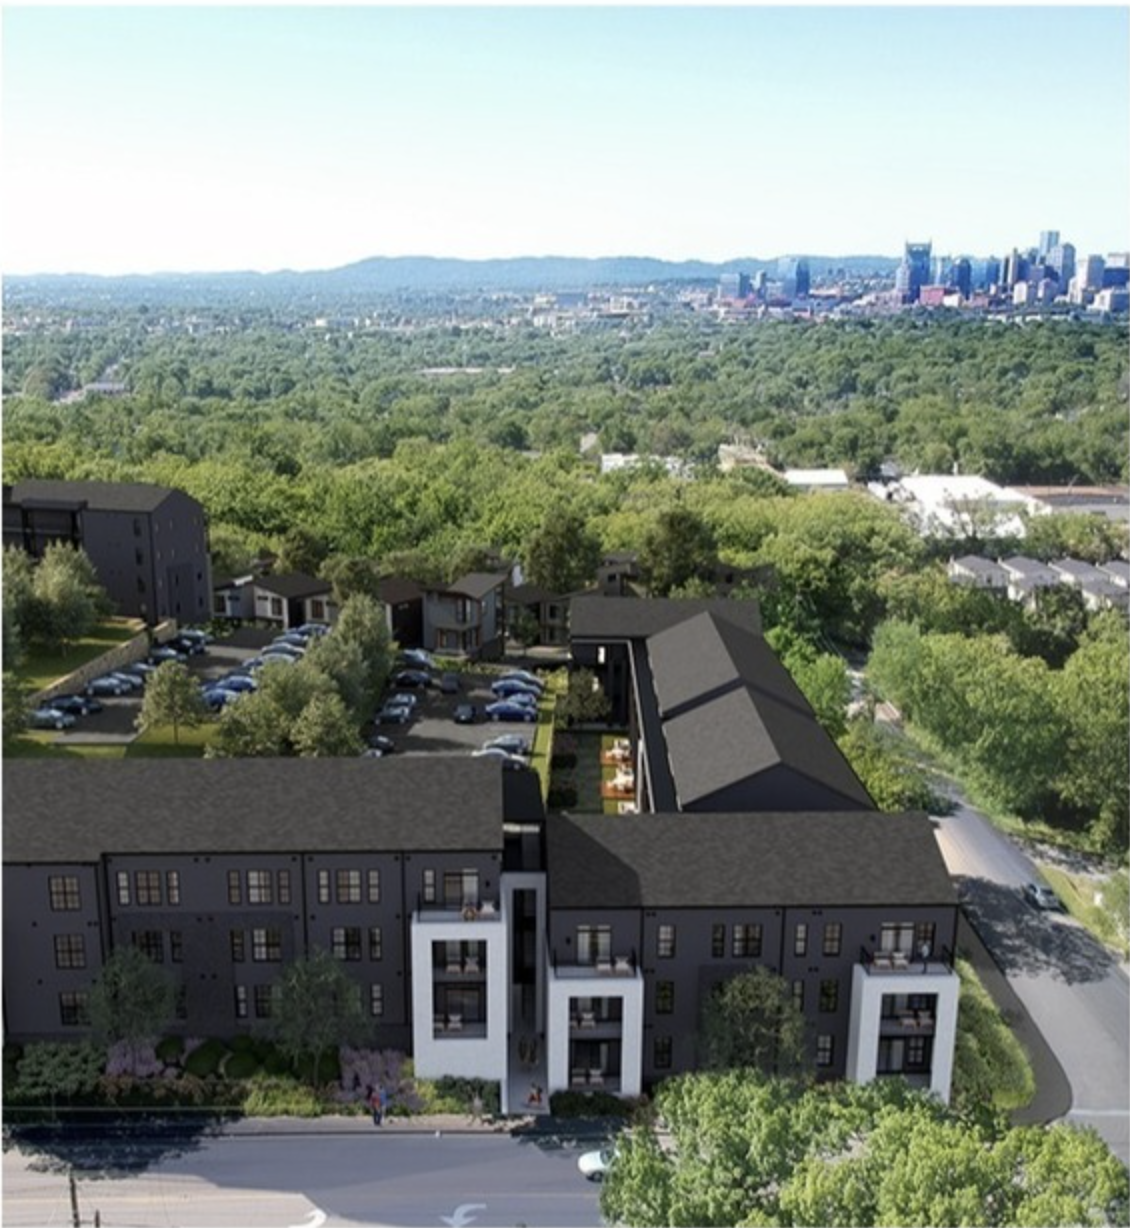 aerial view of the High View residential development in Nashville